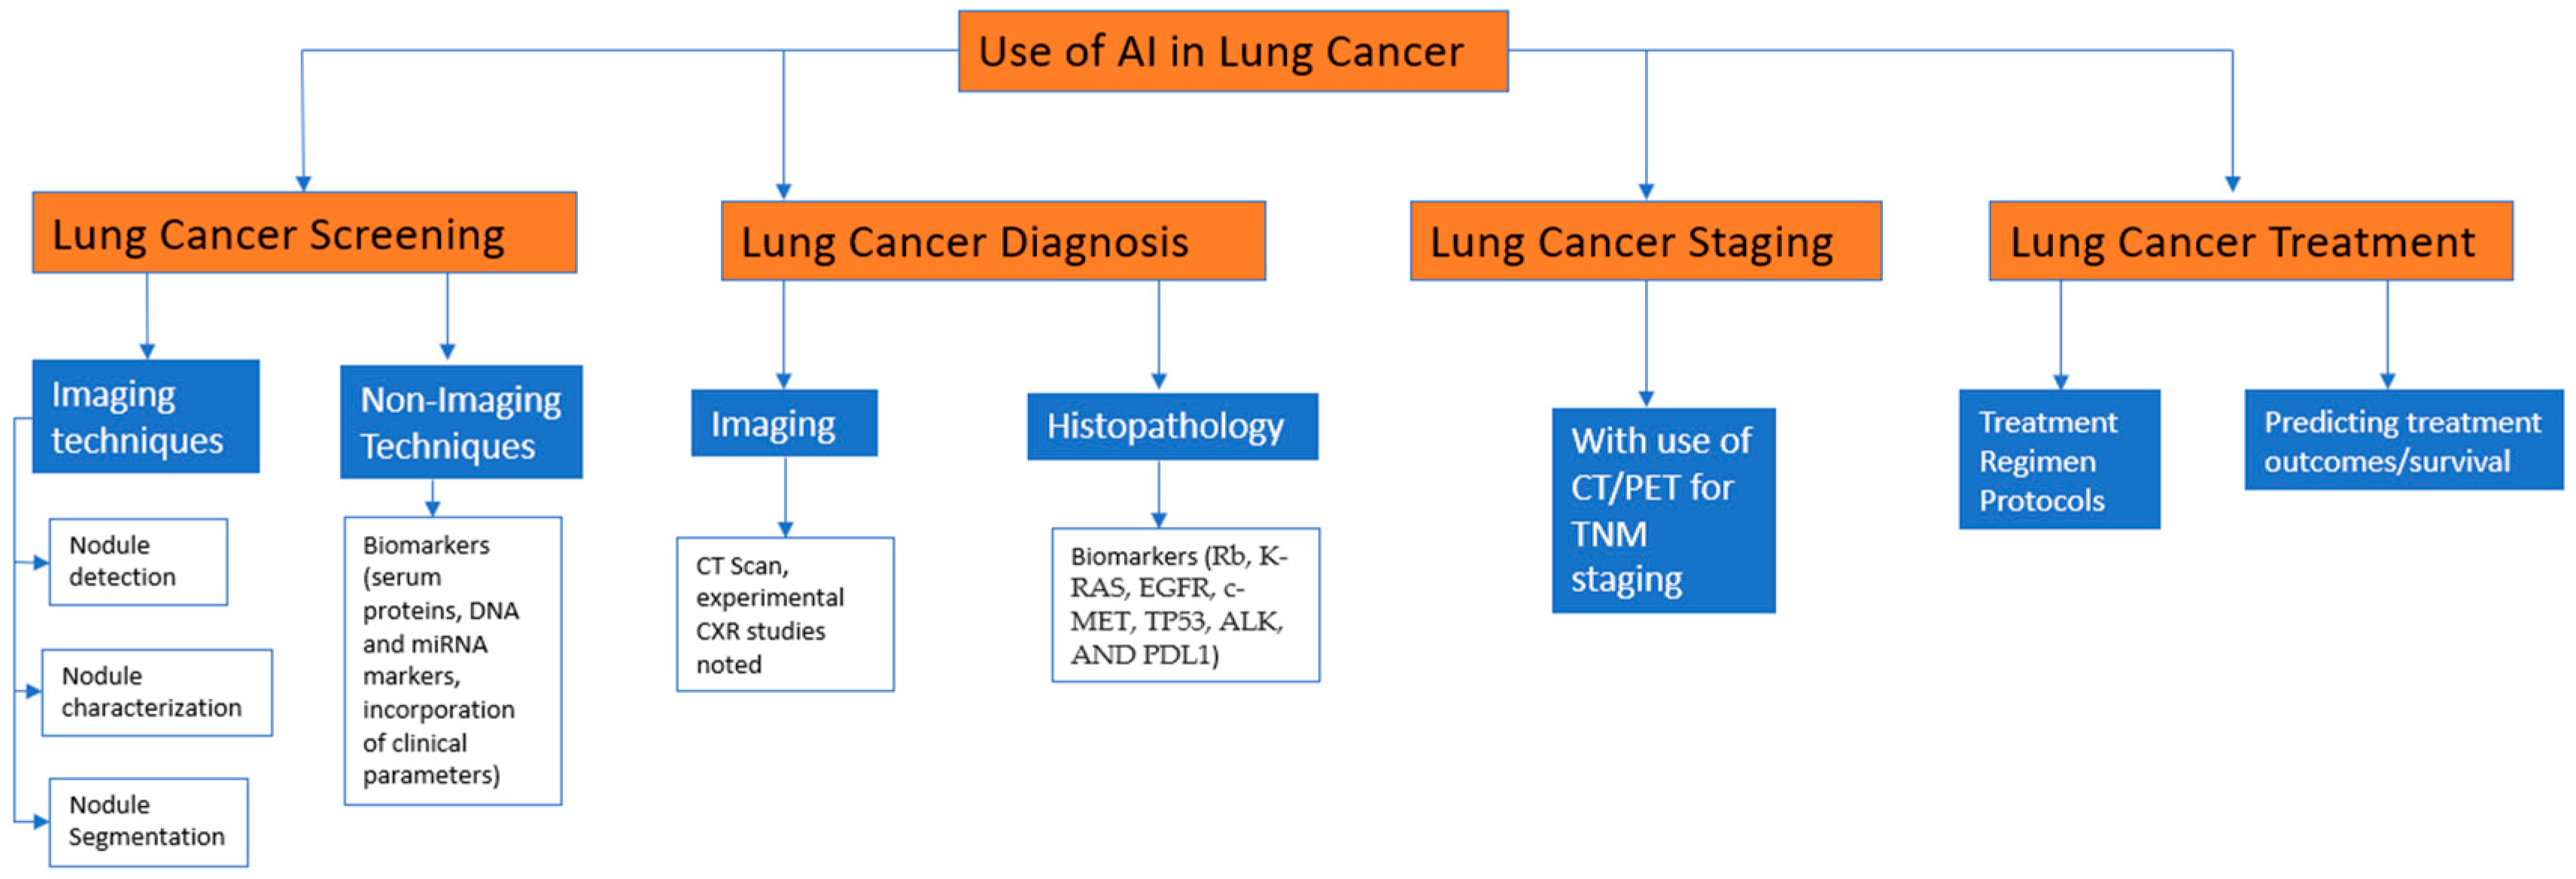 AI in Cancer Detection and Treatment